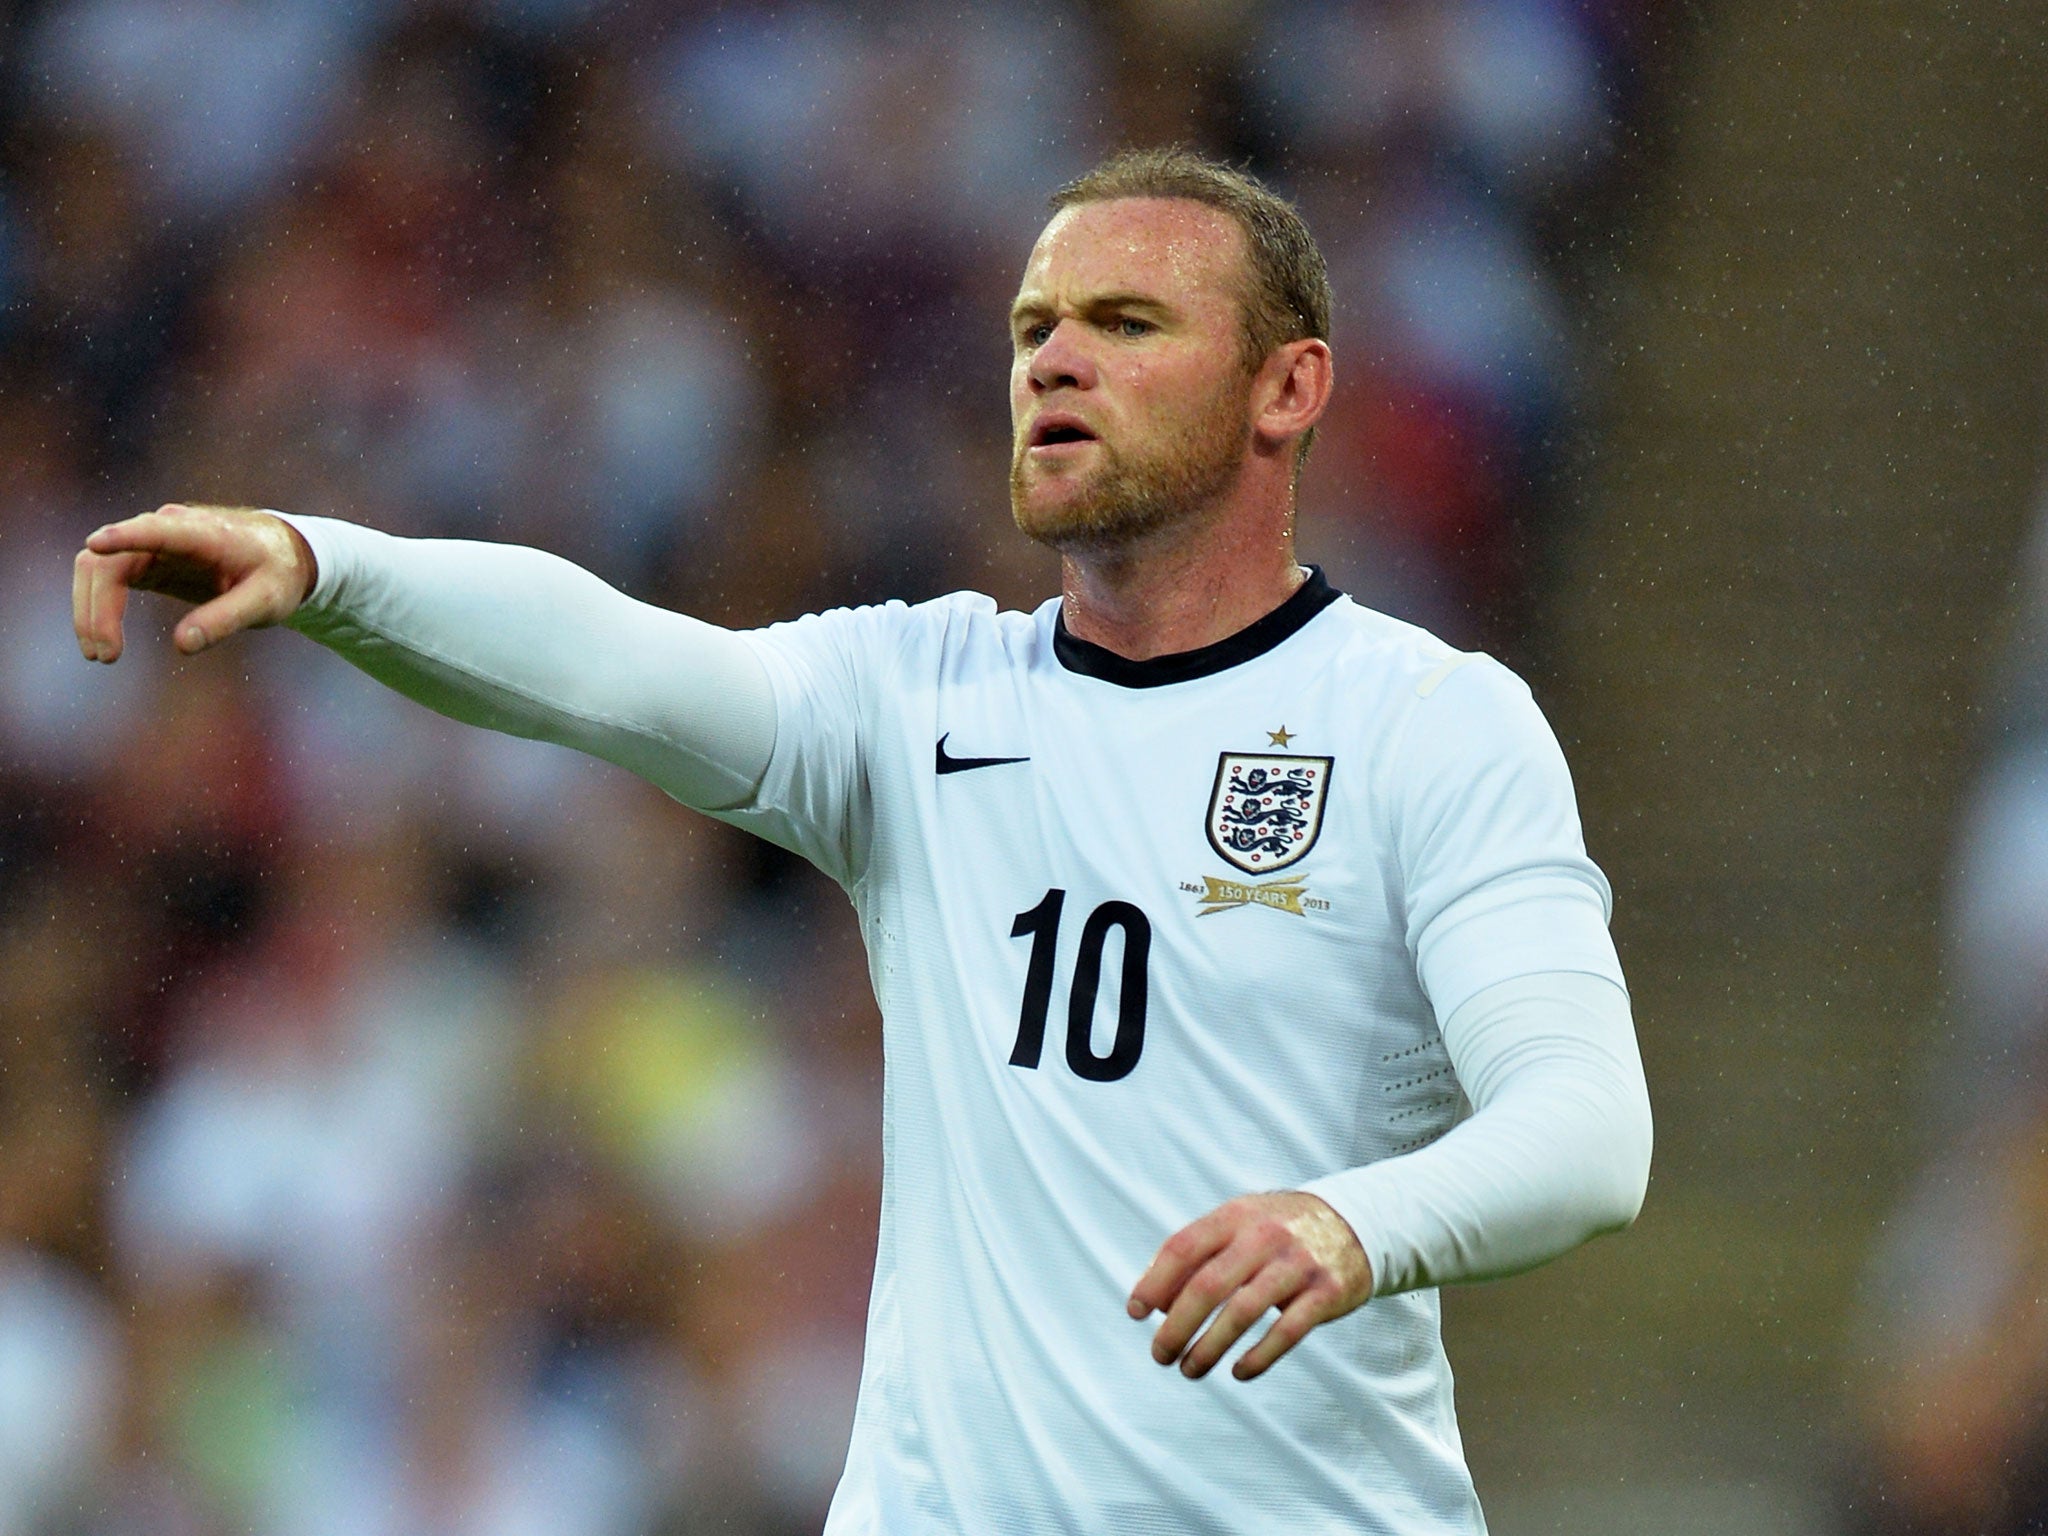 Wayne Rooney should return for England in next week's qualifier against Montenegro after missing the last two games against Moldova and Ukraine